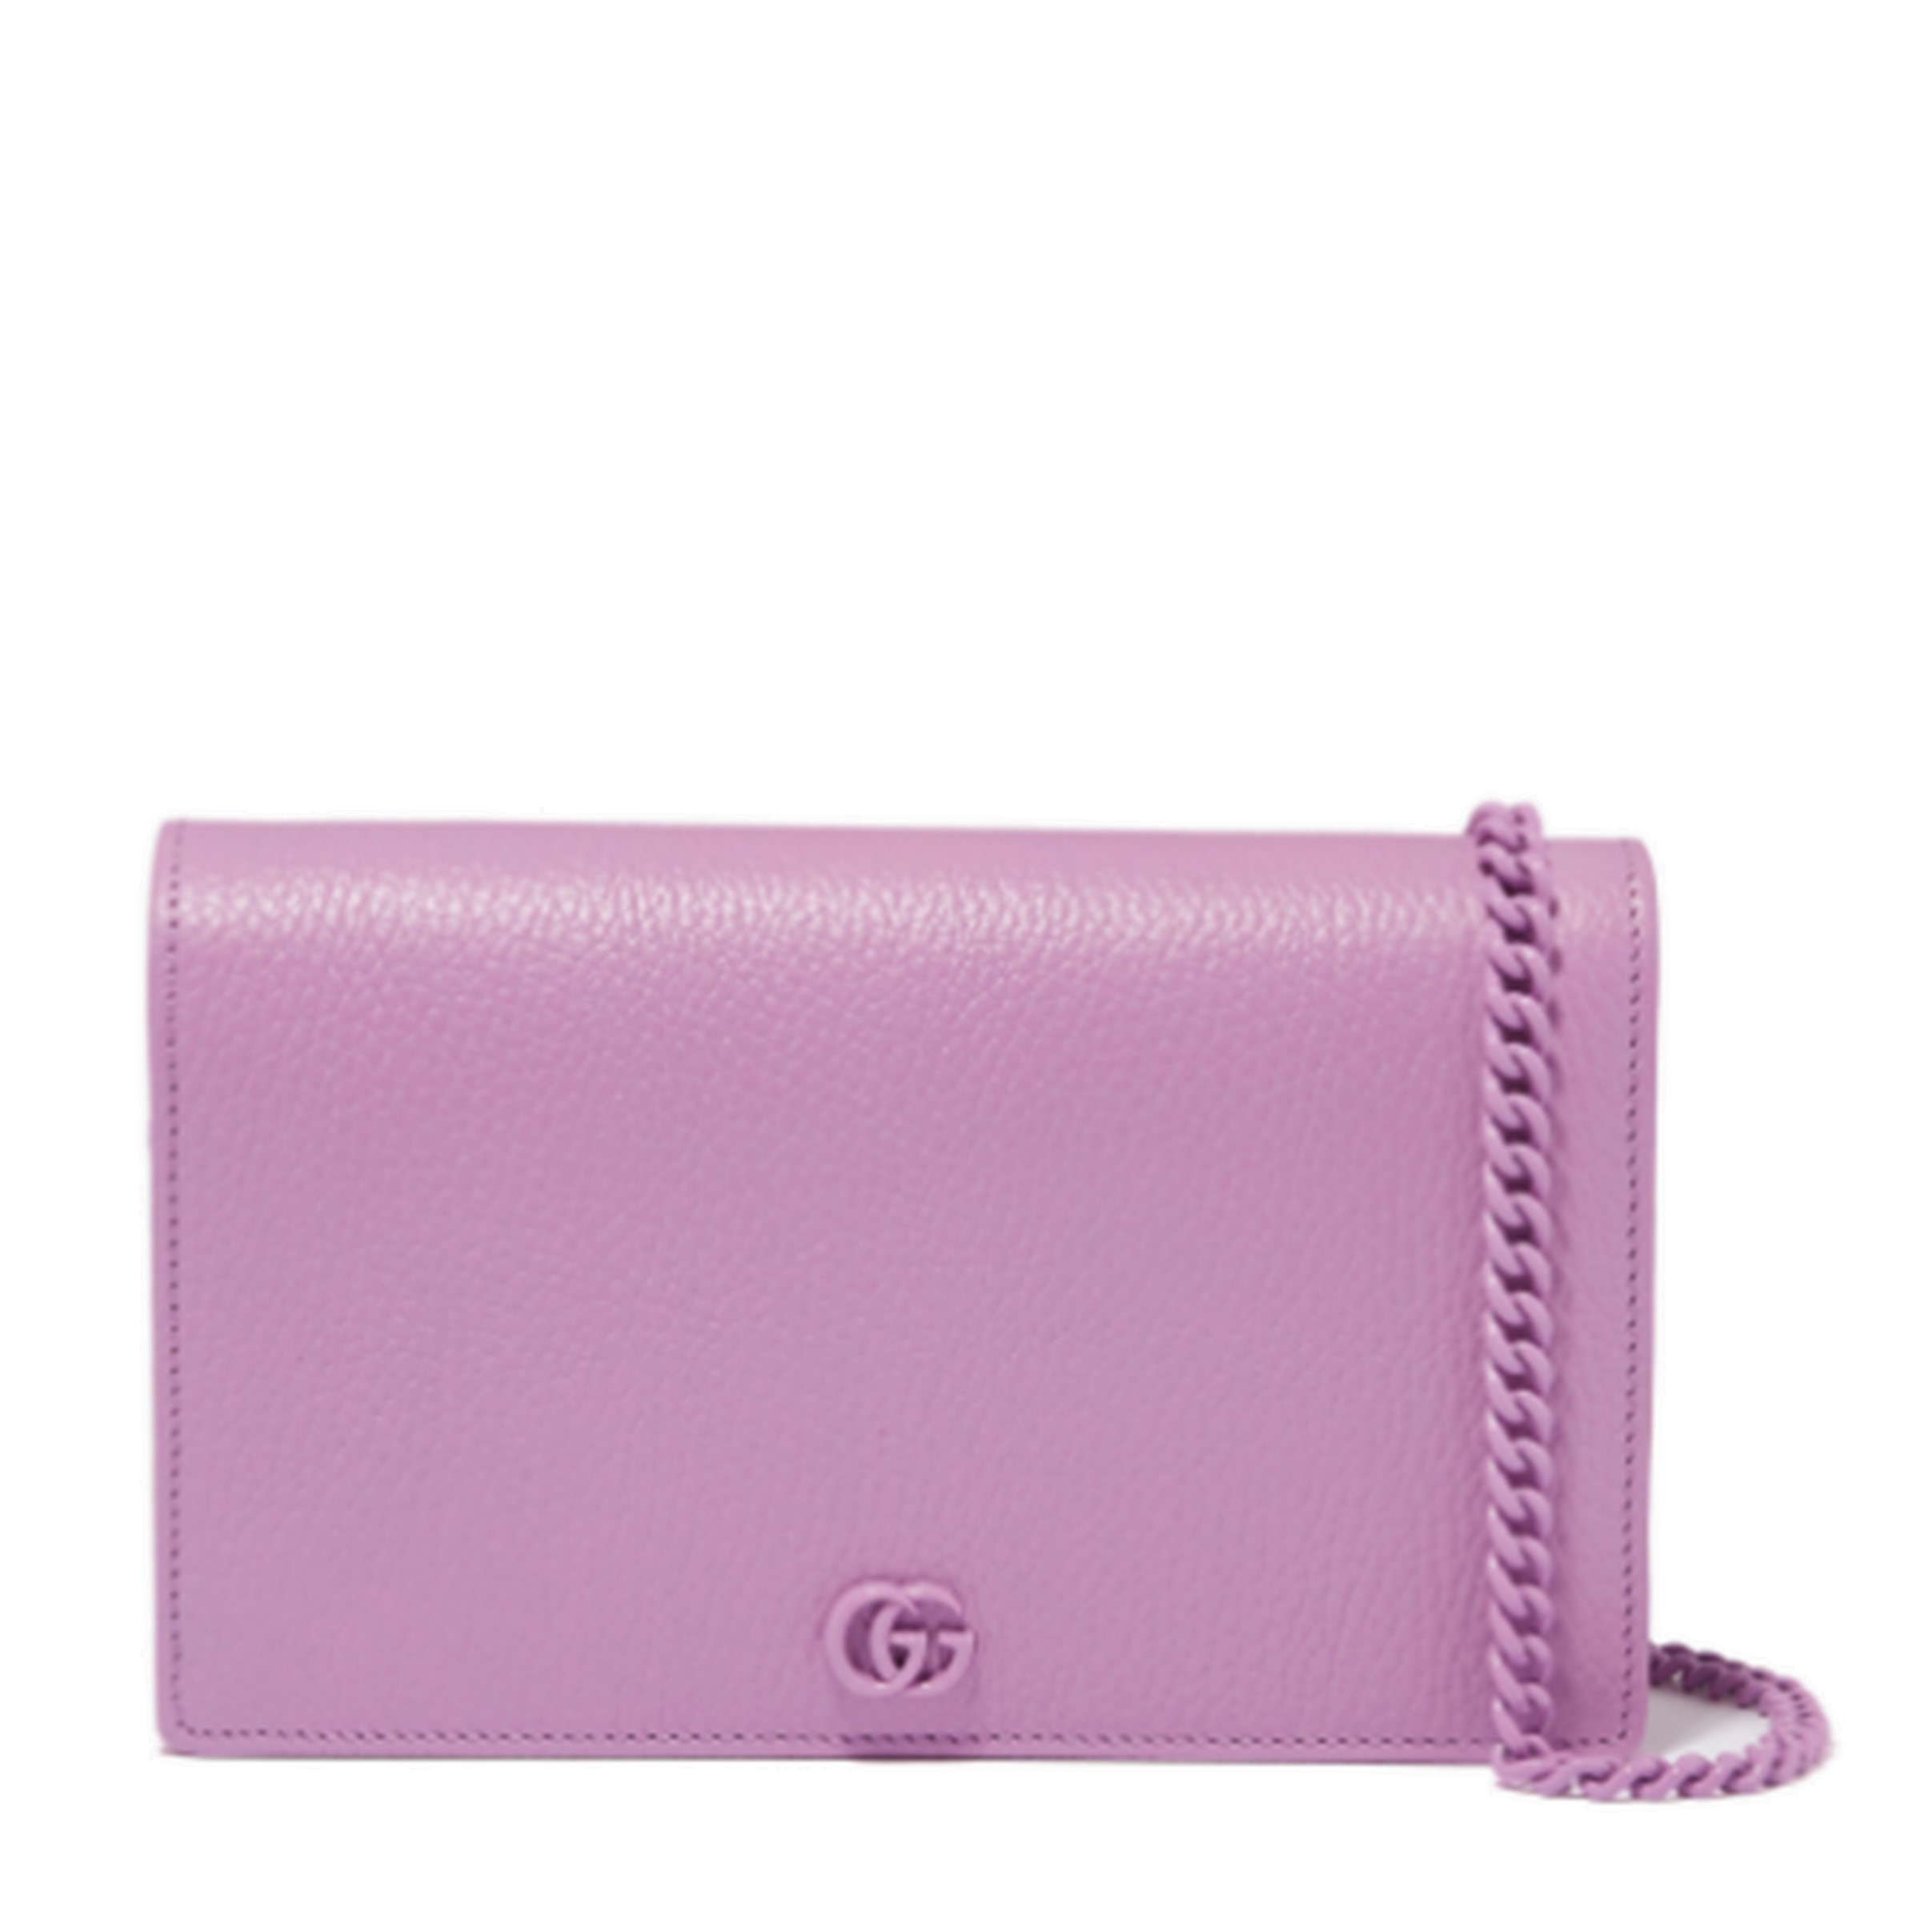 GUCCI Marmont Wallet Chain Bag - Purple - Adorn Collection